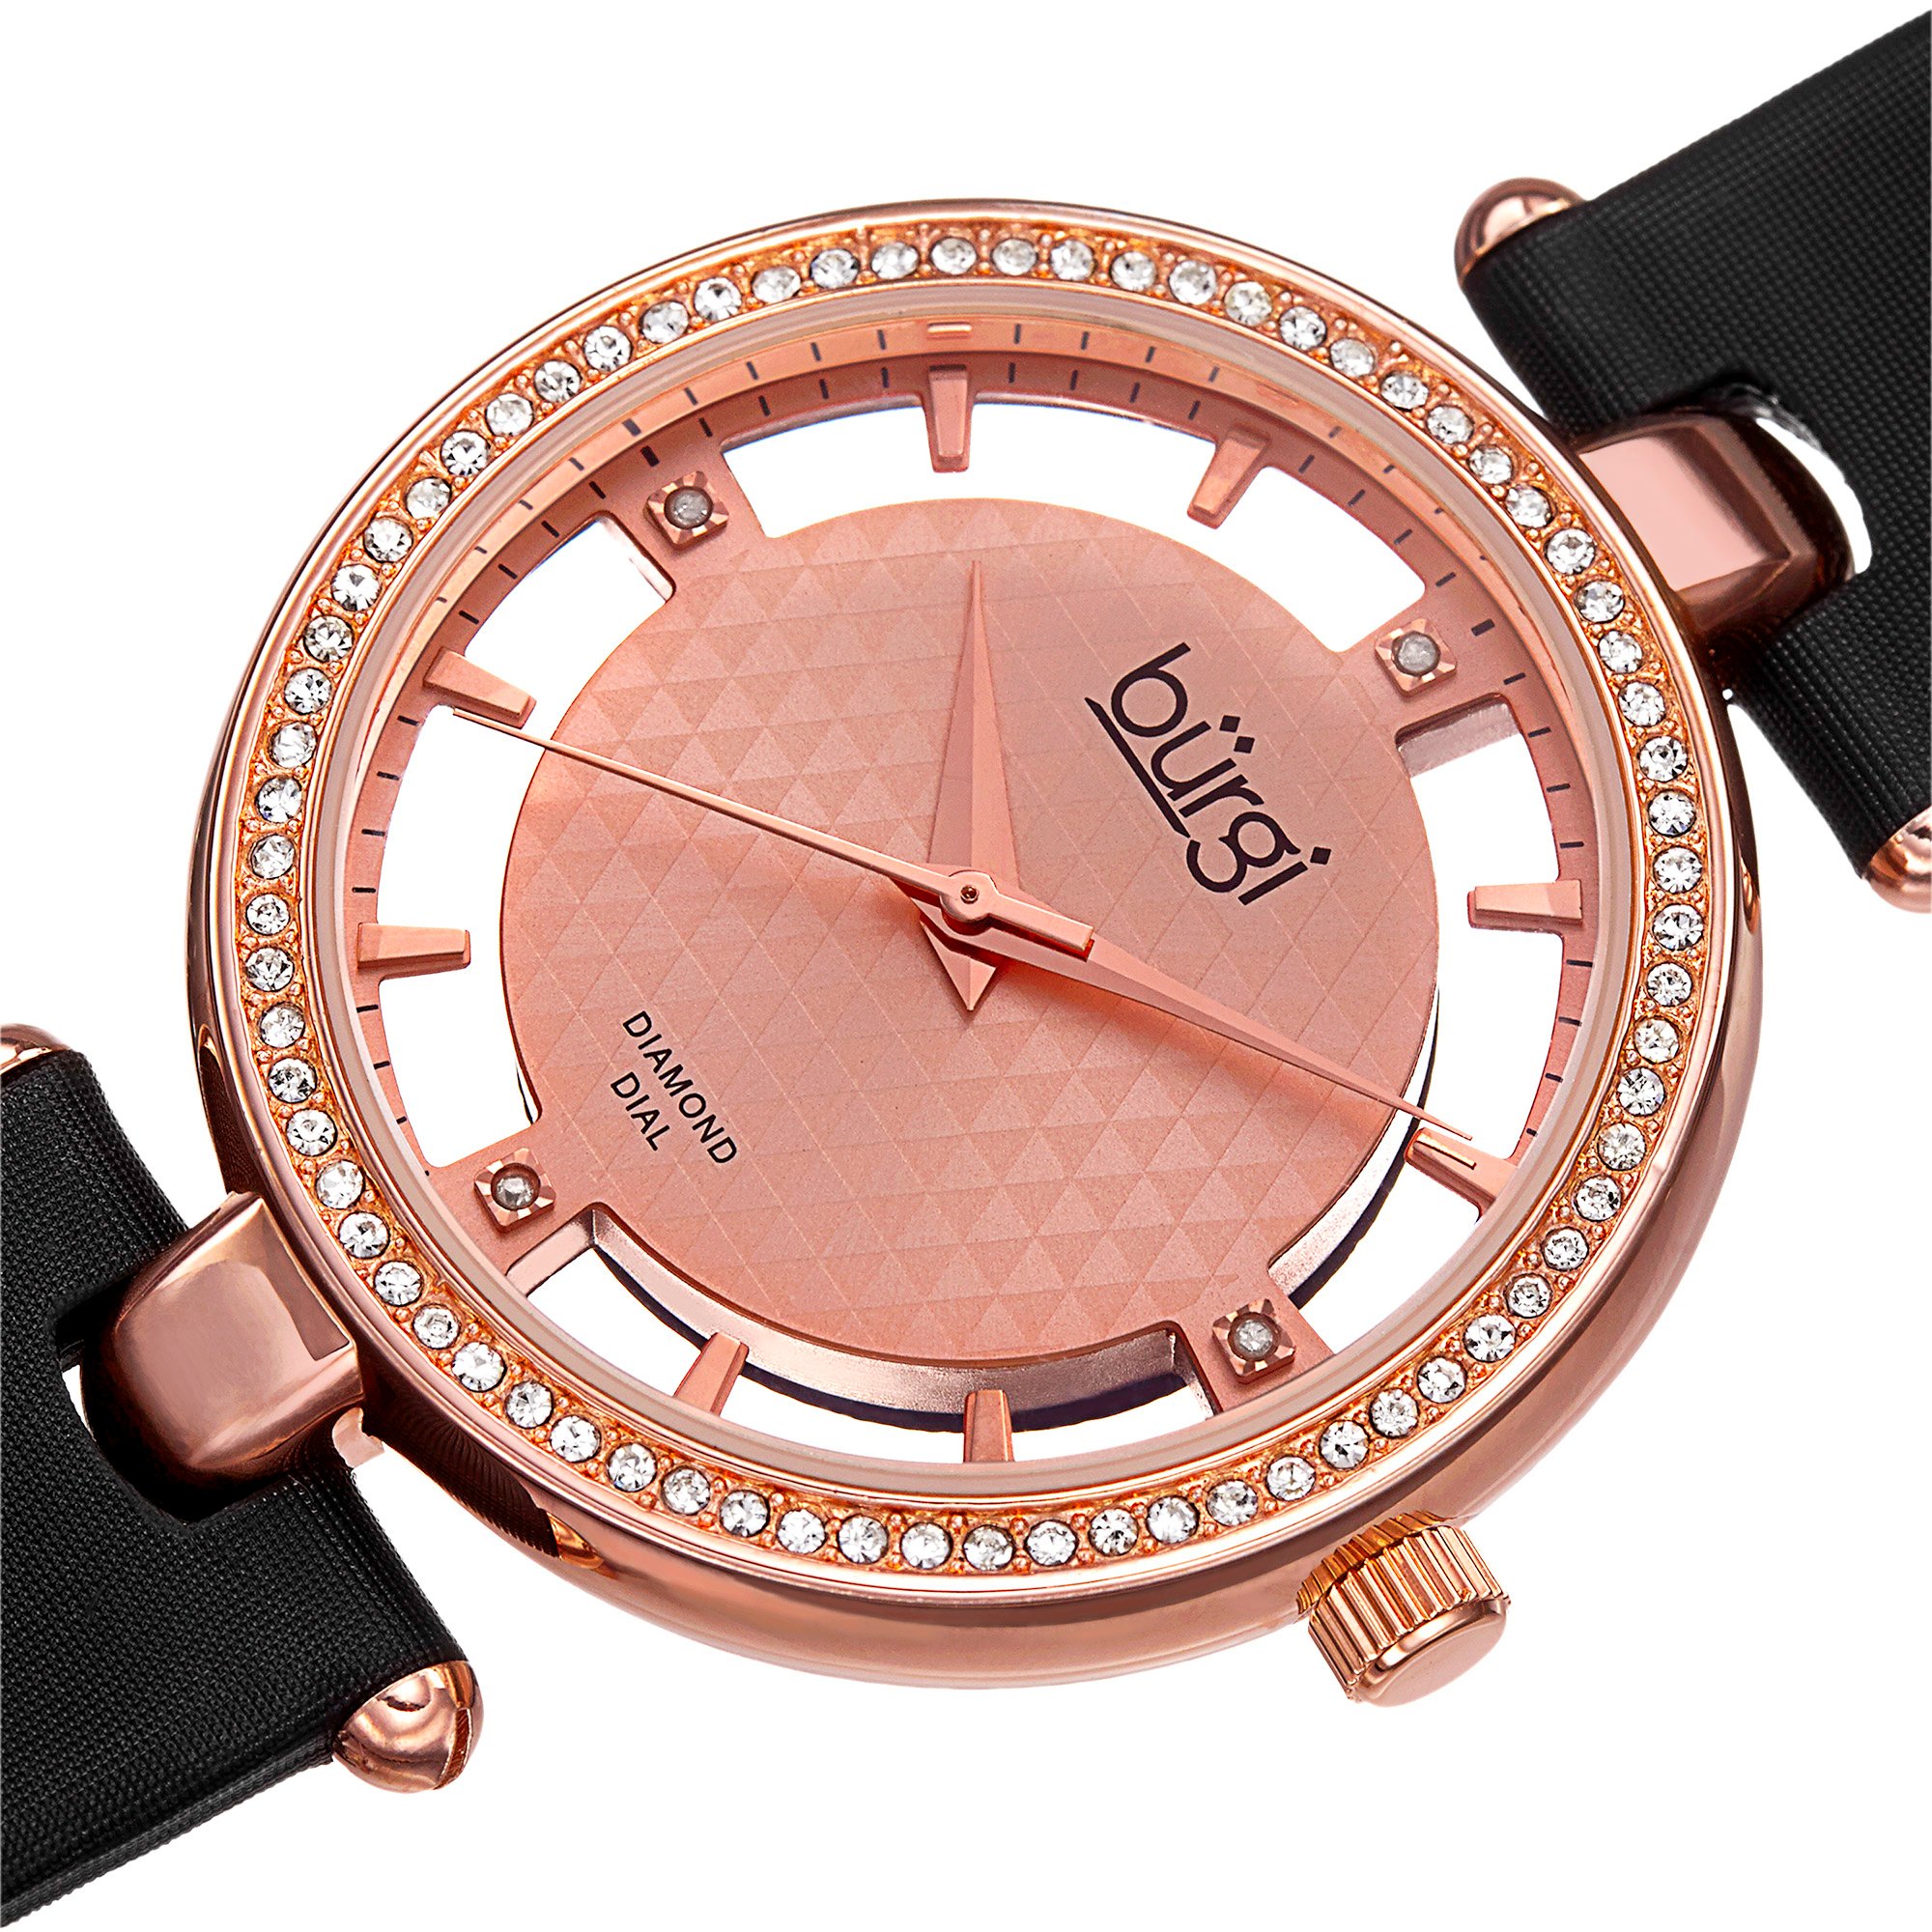 Burgi Swarovski Crystal Studded Watch - 4 Genuine Diamond Markers, See Through and Sunray Dial On Satin Over Leather Women’s Watch - BUR104